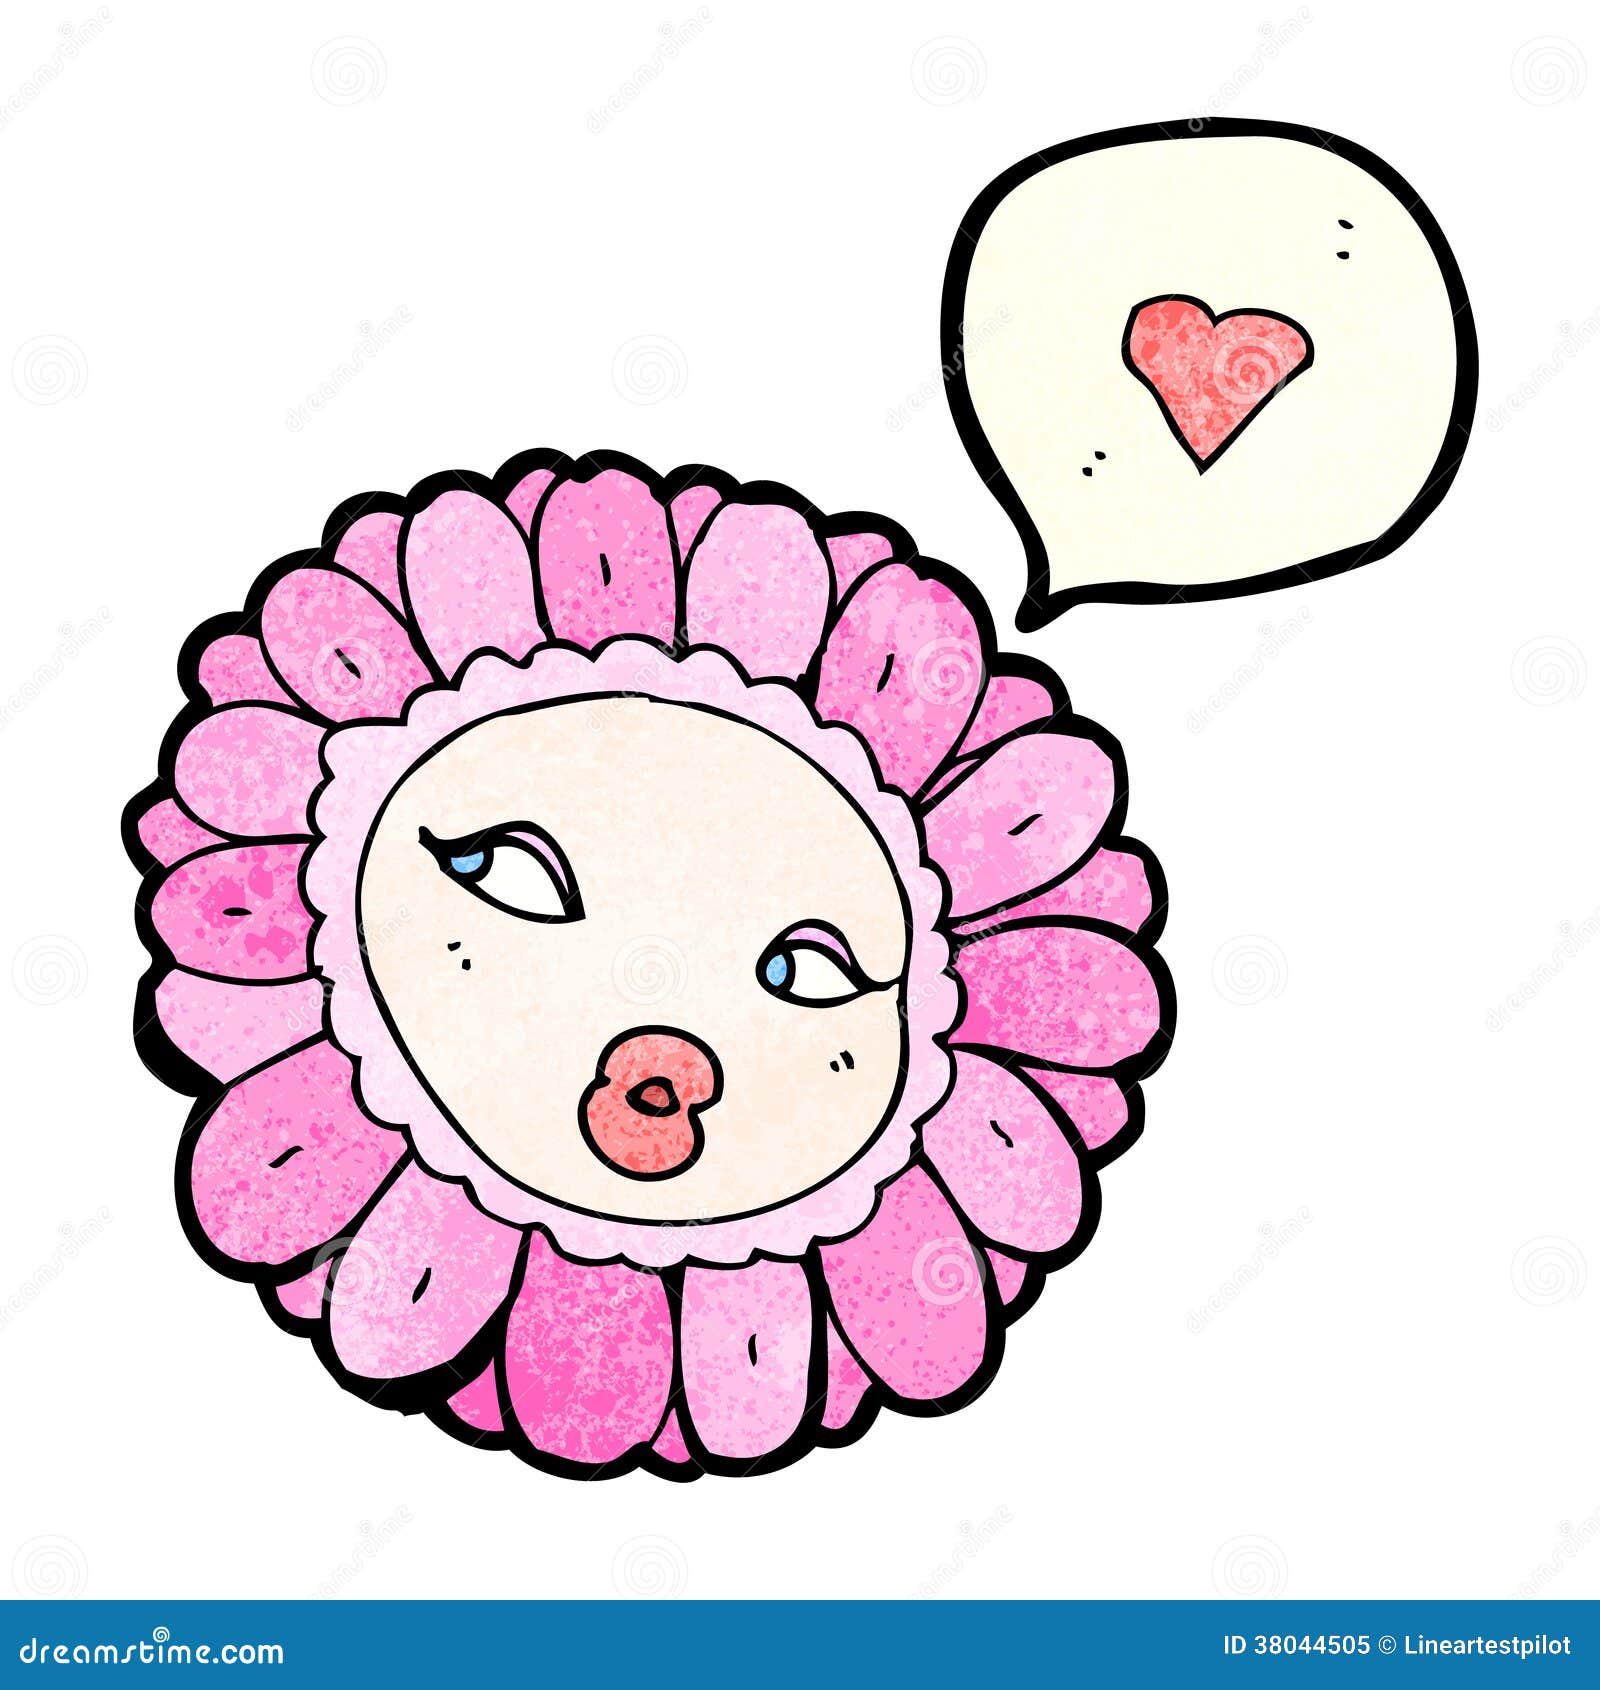 More similar stock images of ` pretty flower face cartoon `